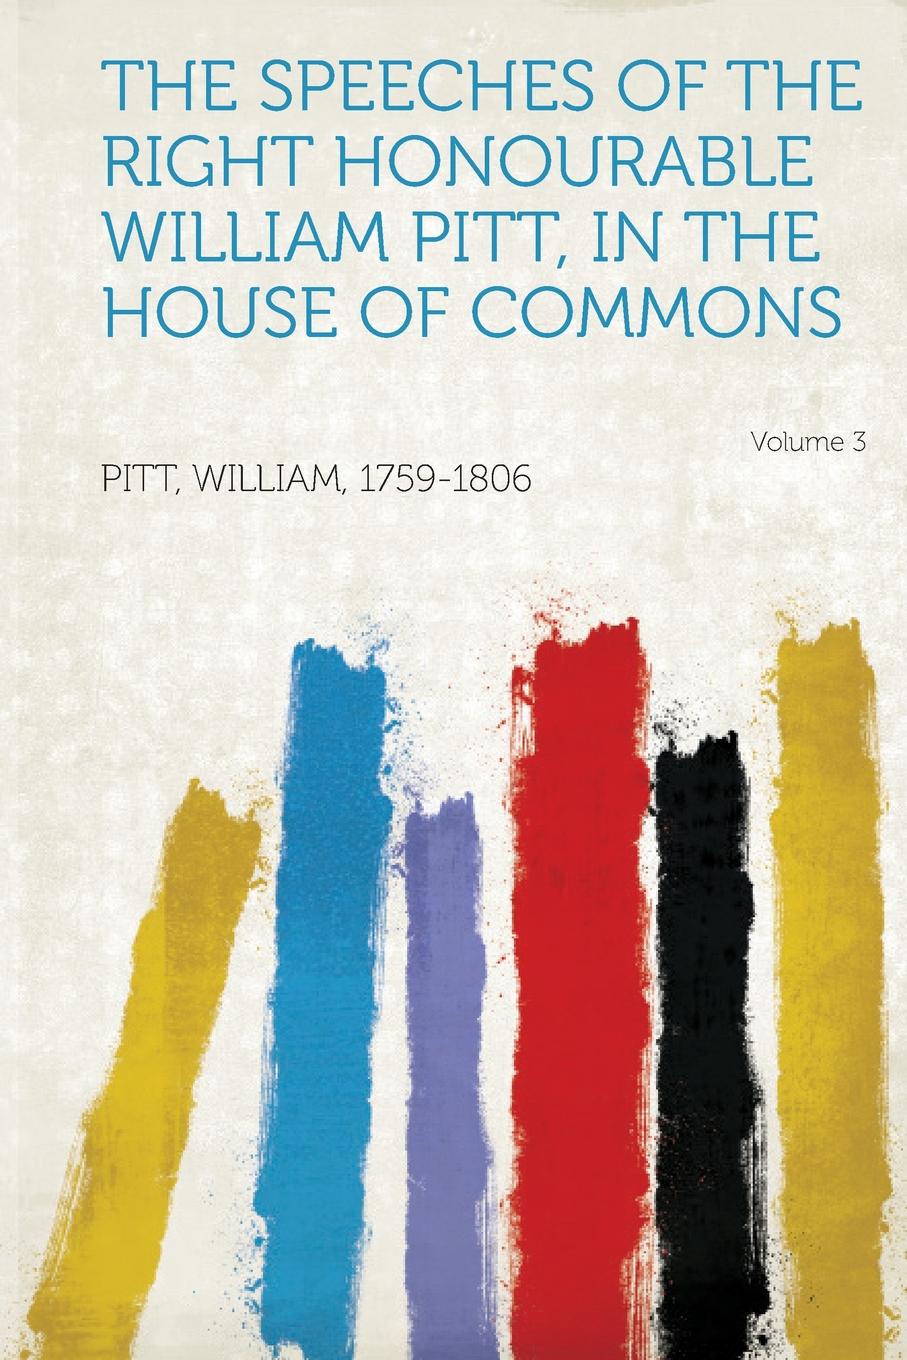 The Speeches of the Right Honourable William Pitt, in the House of Commons Volume 3